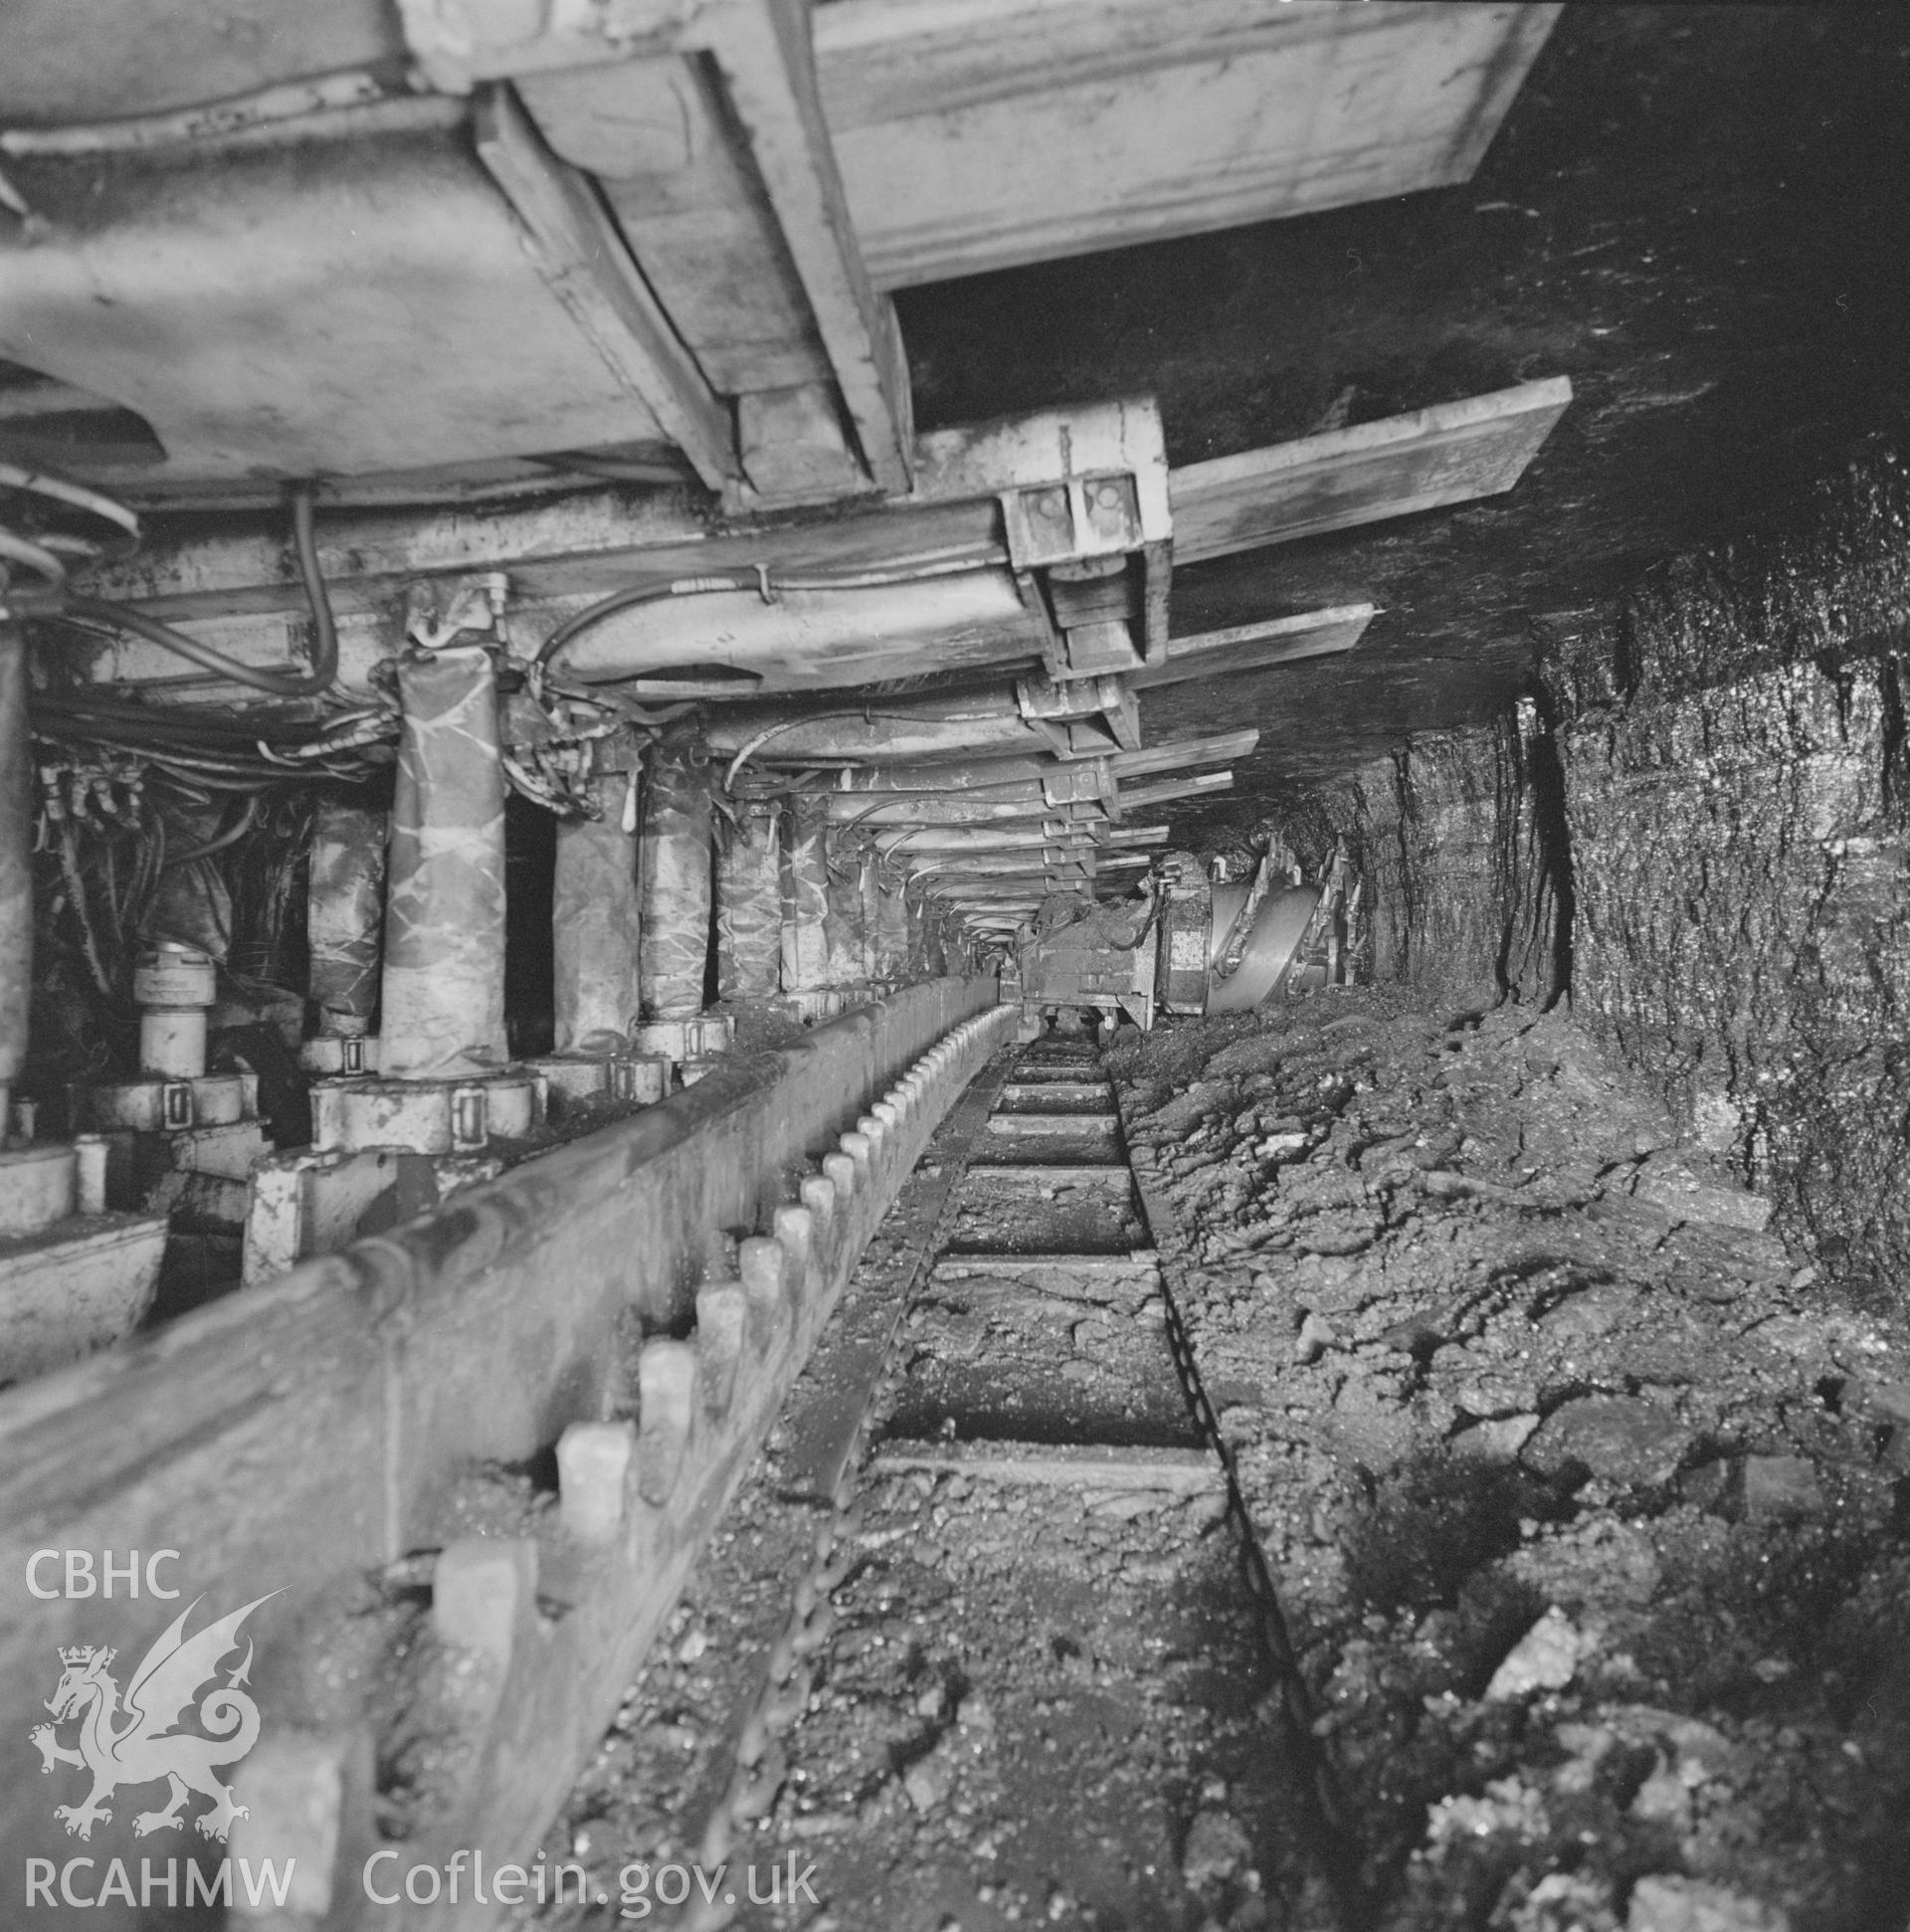 Digital copy of an acetate negative showing coal face at Blaenant Colliery, from the John Cornwell Collection.